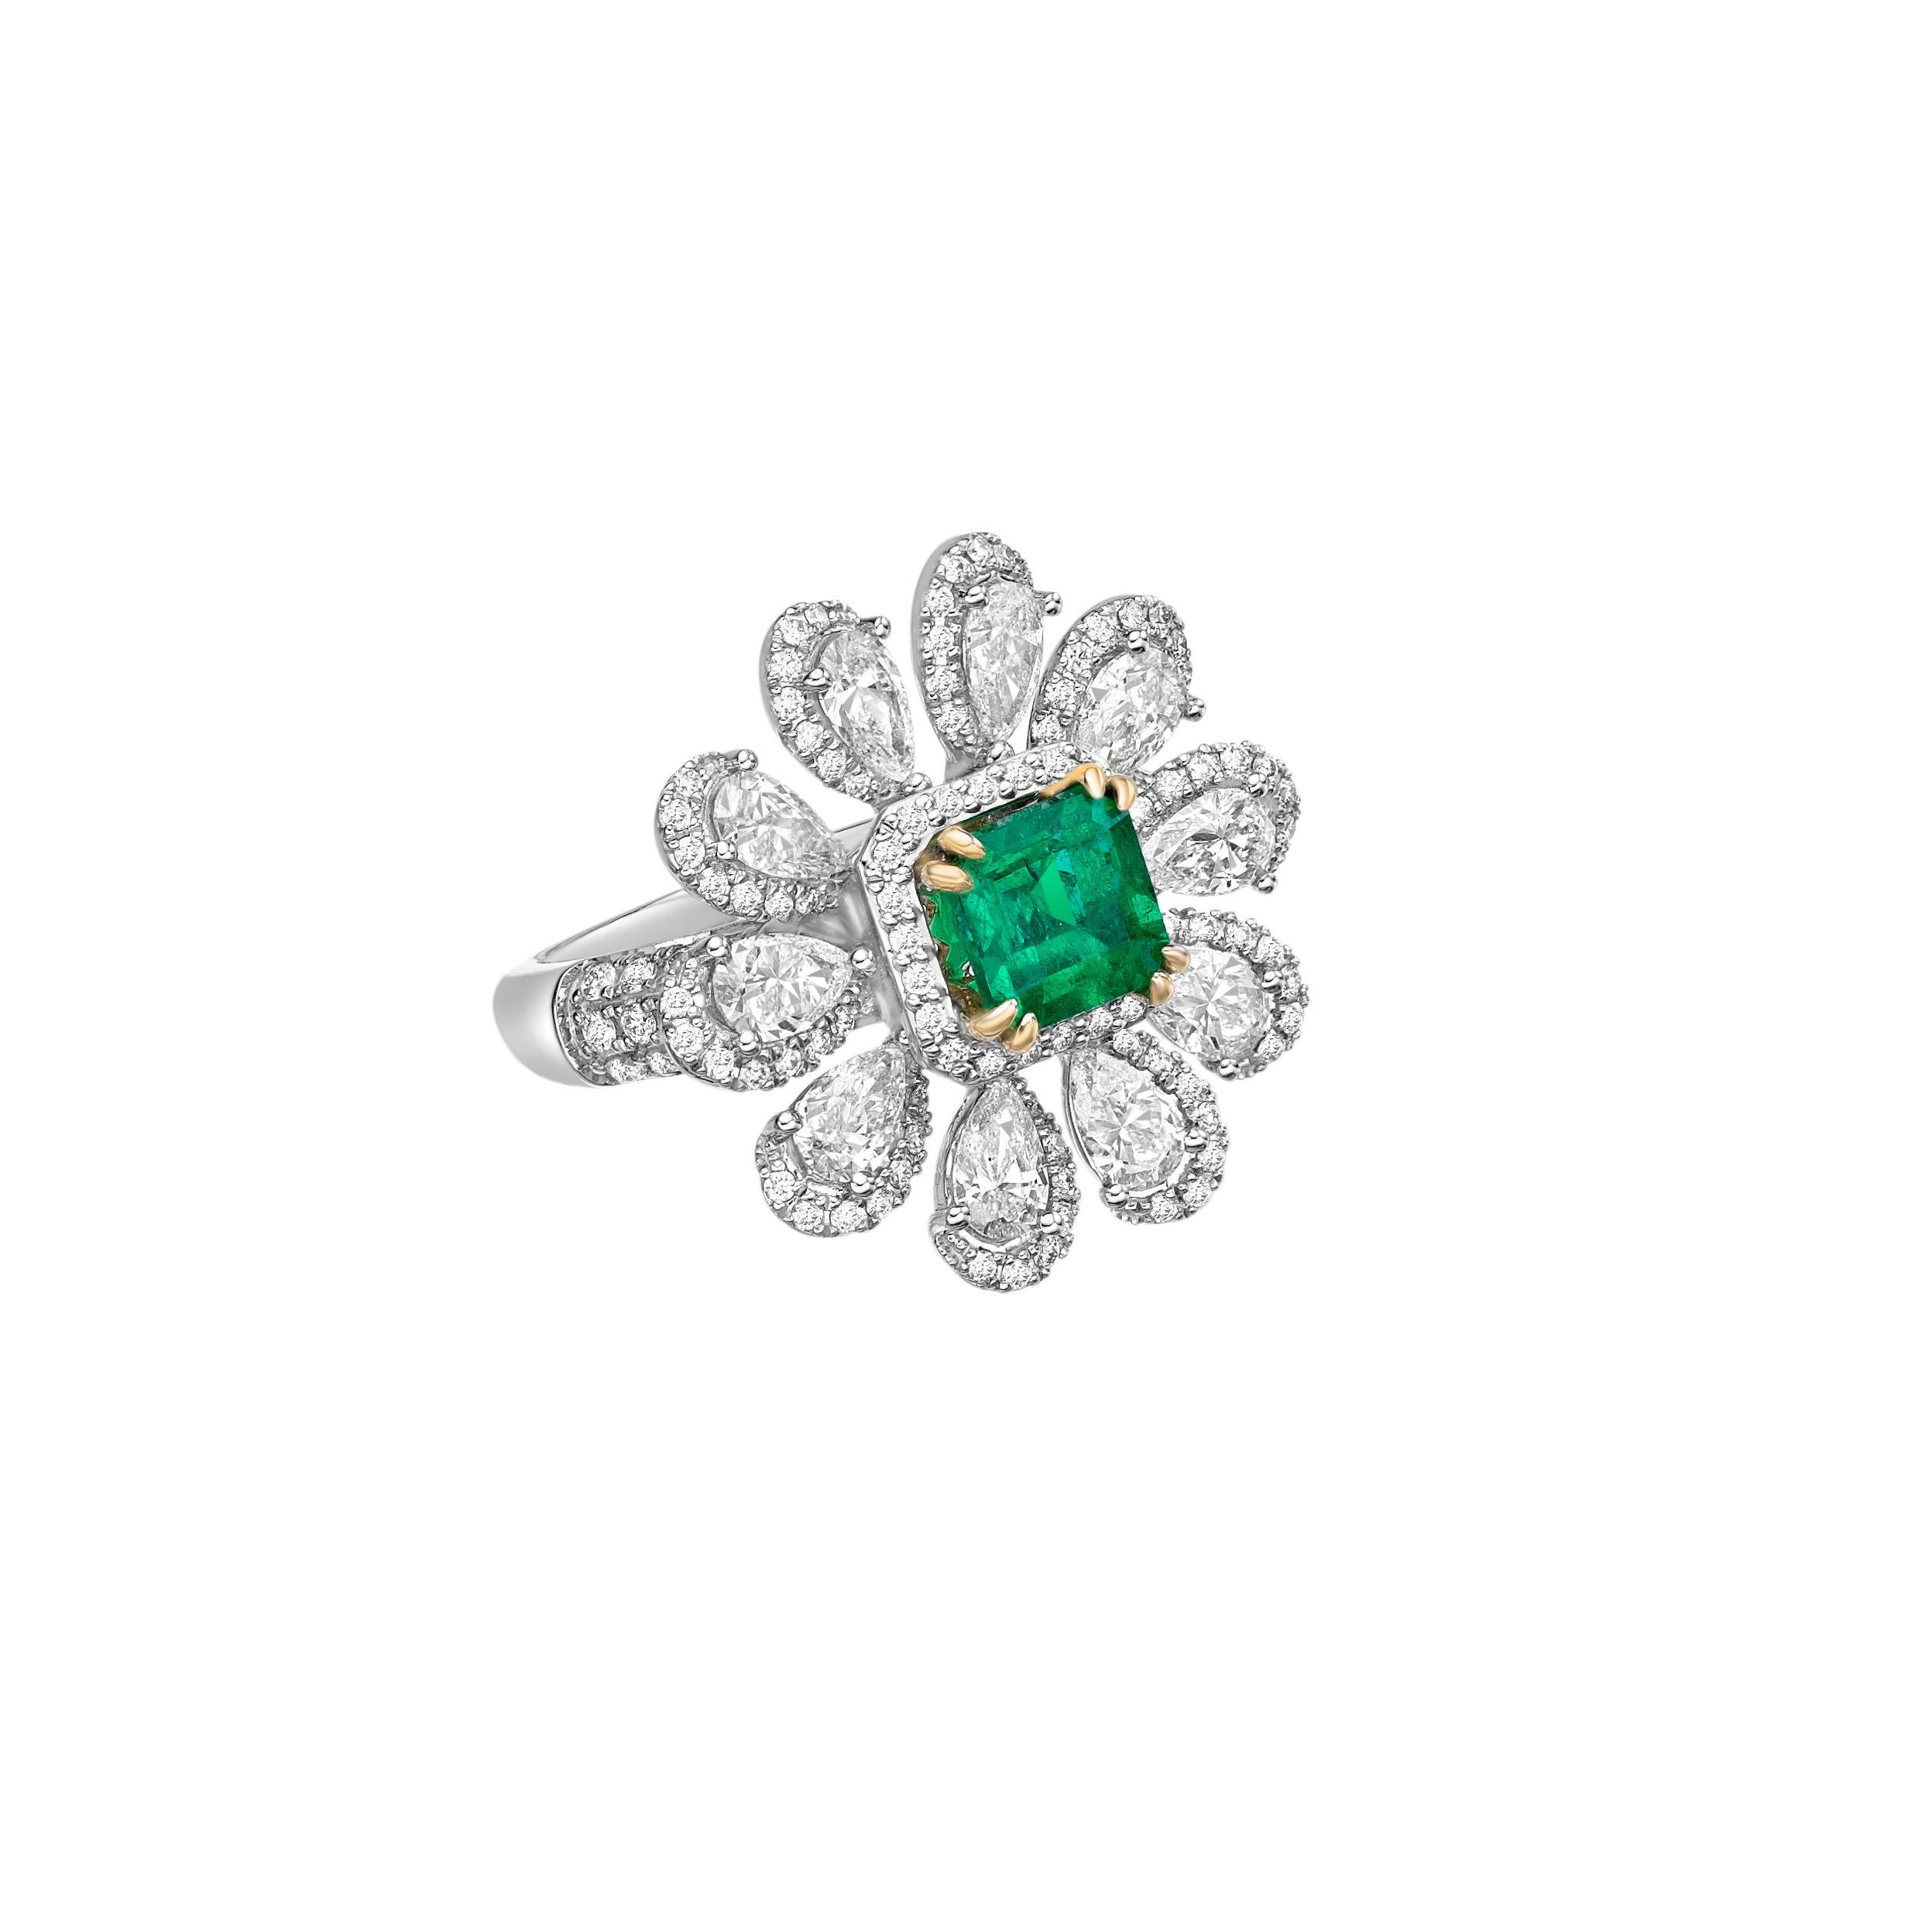 Sunflower Emeralds by Sunita Nahata Fine Design. This collection showcases brilliant green emeralds set on a bed of beautiful white diamonds set in white yellow gold. This is a small and delicate bridal ring that yet emanates glamour and